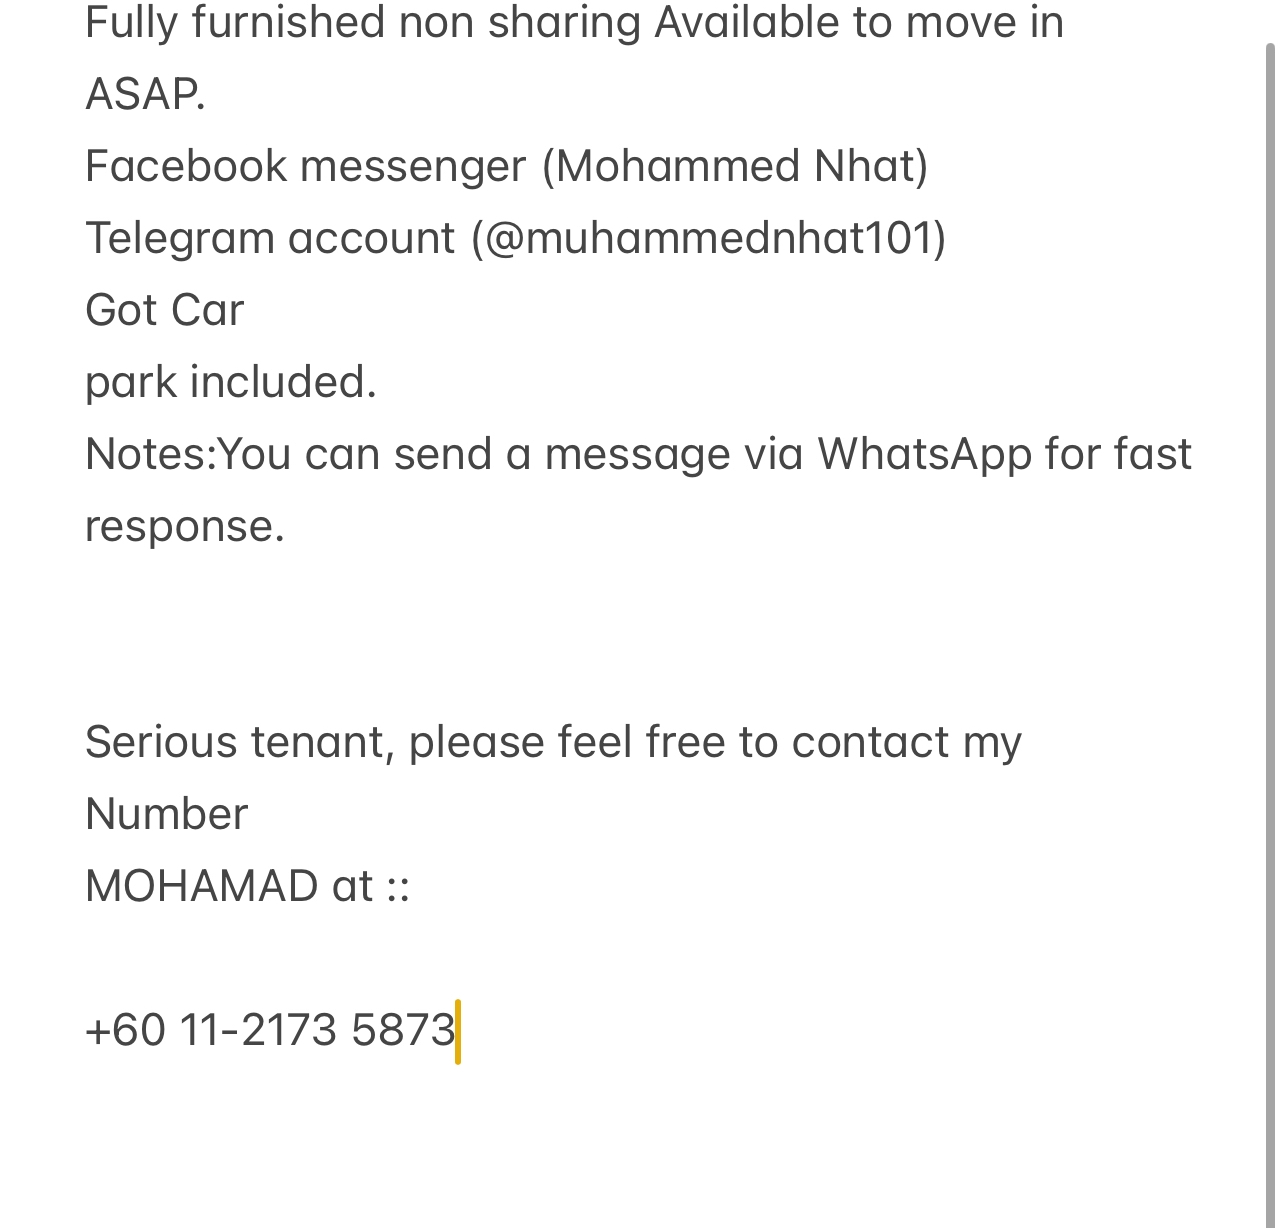 room for rent, master room, jalan teruntong, Send the owner a message on WhatsApp/facebook if you want to RENT the unit facebook (Mohammed Nhat)&Telegram(@muhammednhat101) Fully furnished non sharing :(comfortable)